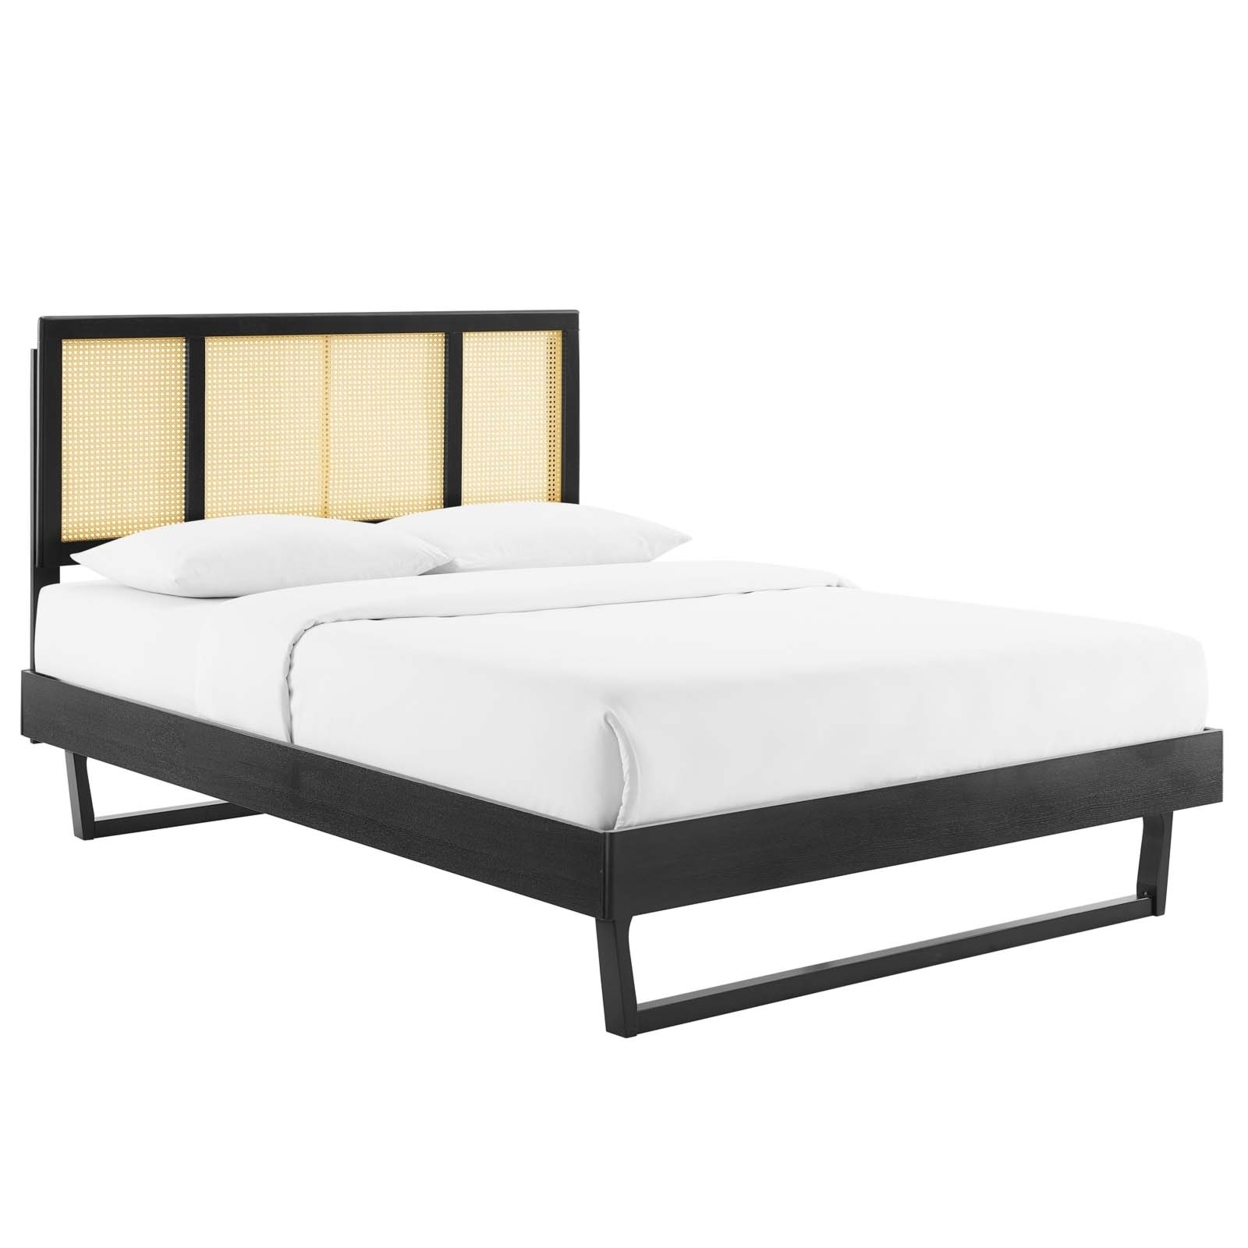 Kelsea Cane And Wood King Platform Bed With Angular Legs, Black